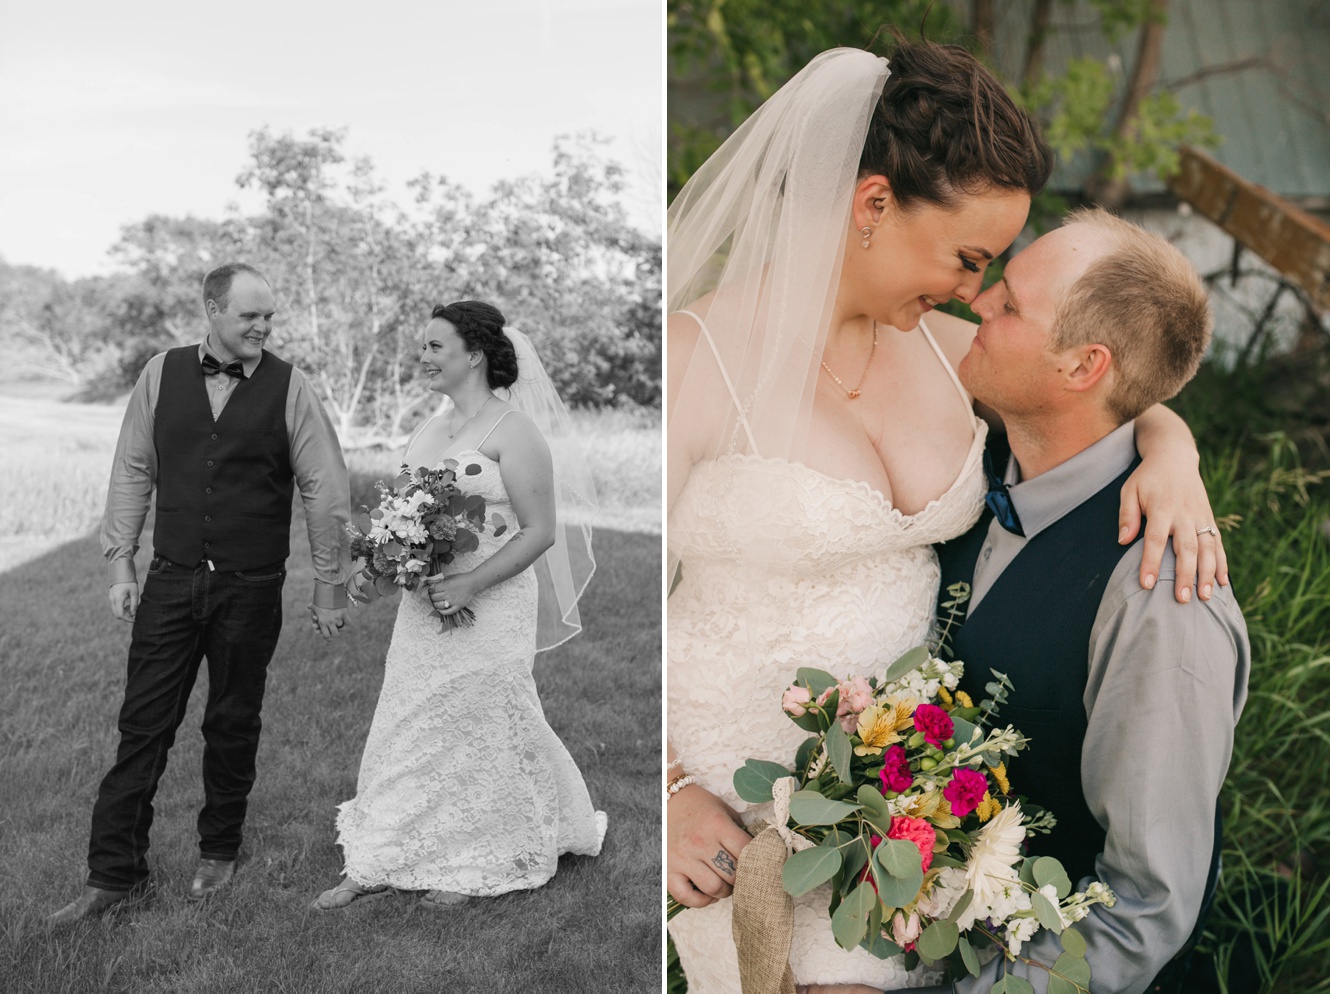 Casual Summer Wedding in Saskatchewan with colourful wildflowers and handmade elements